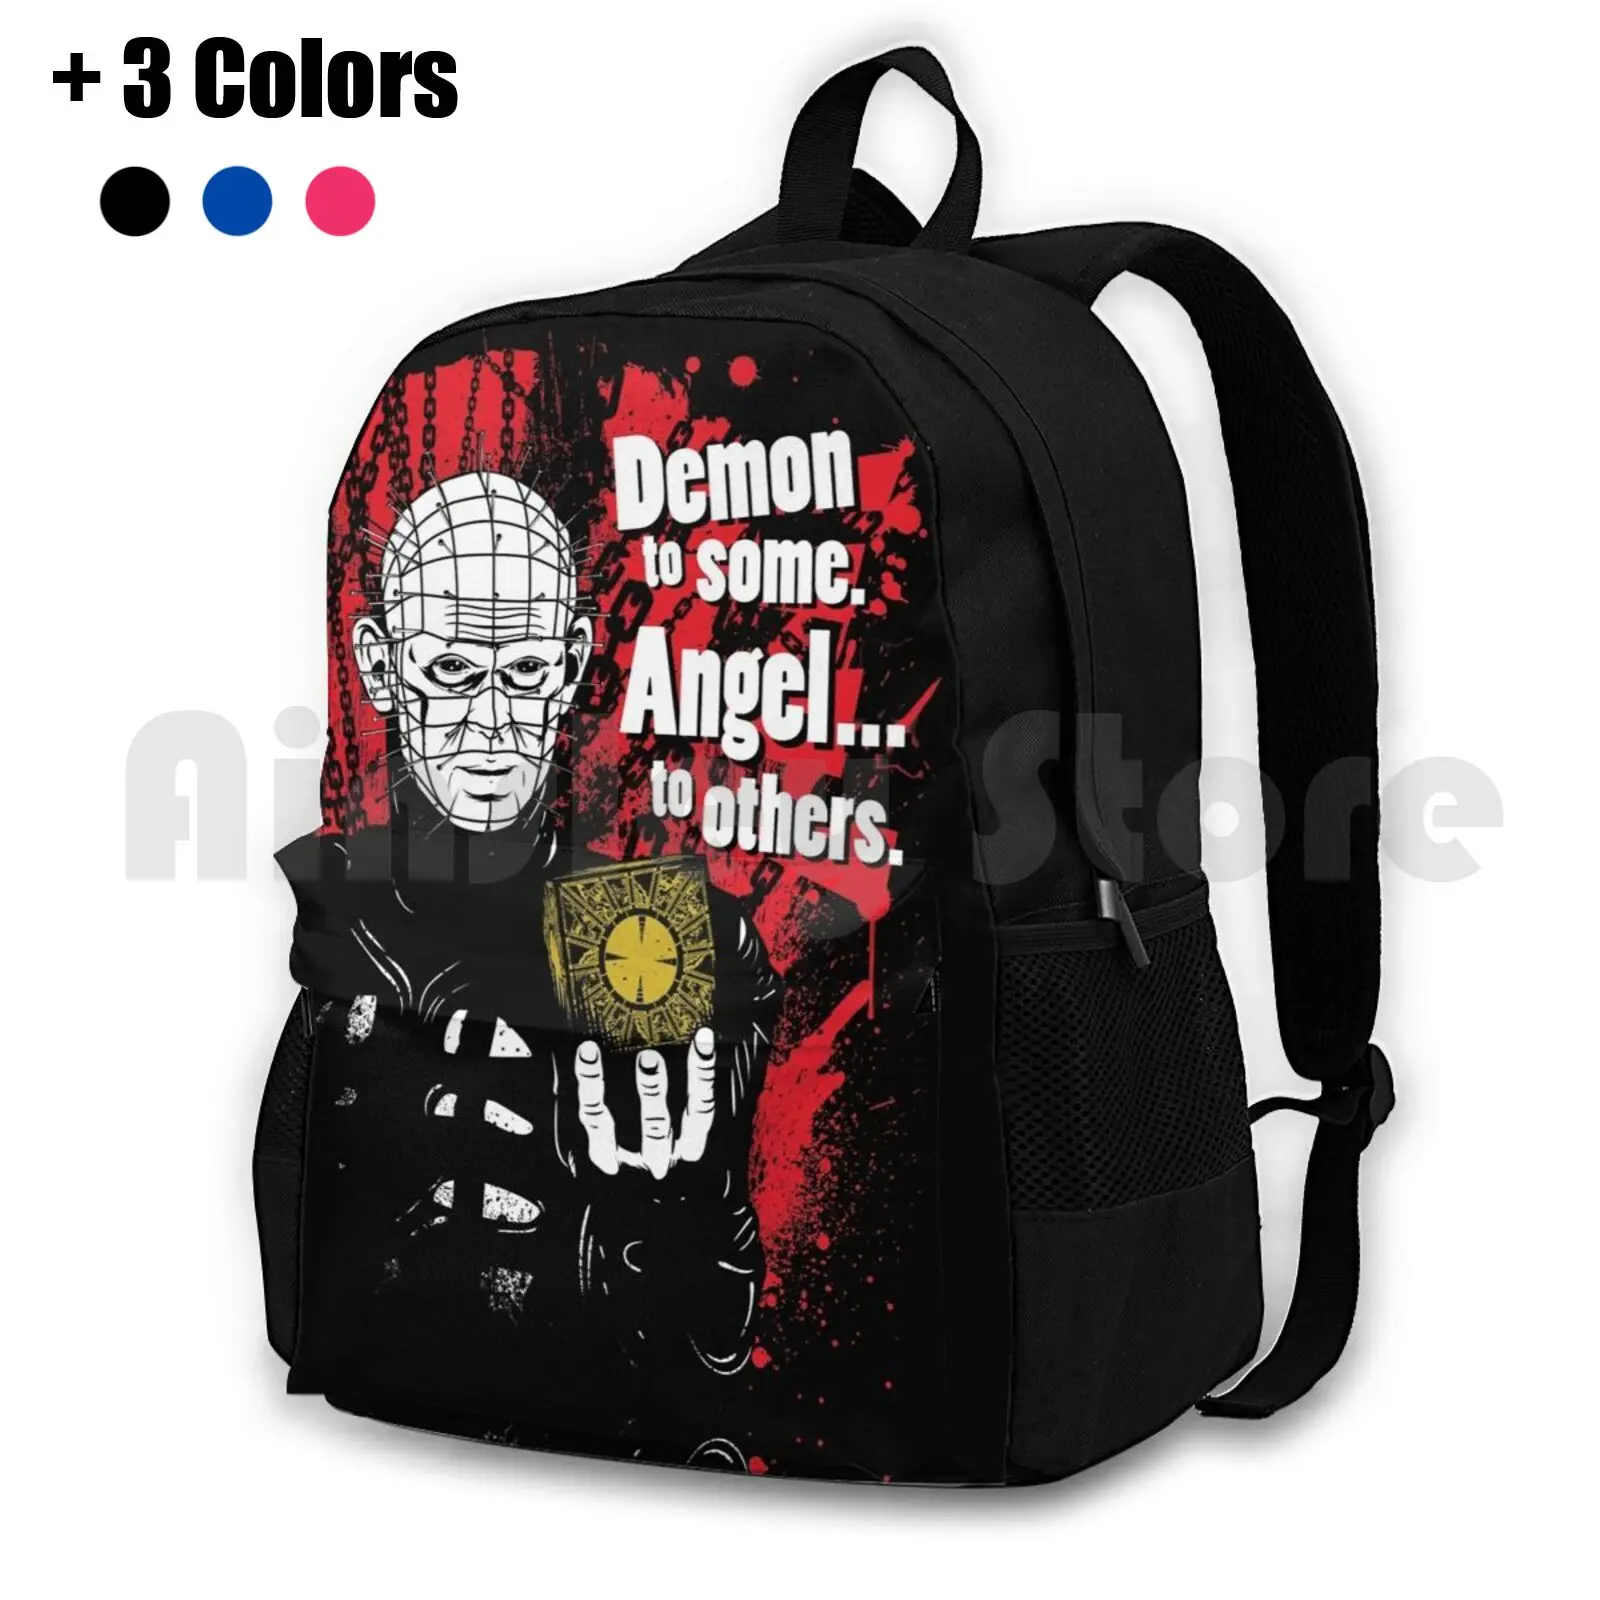 

Demon To Some. Angel ... To Others. Outdoor Hiking Backpack Riding Climbing Sports Bag Hellraiser Pinhead 80S Movies Cuotes